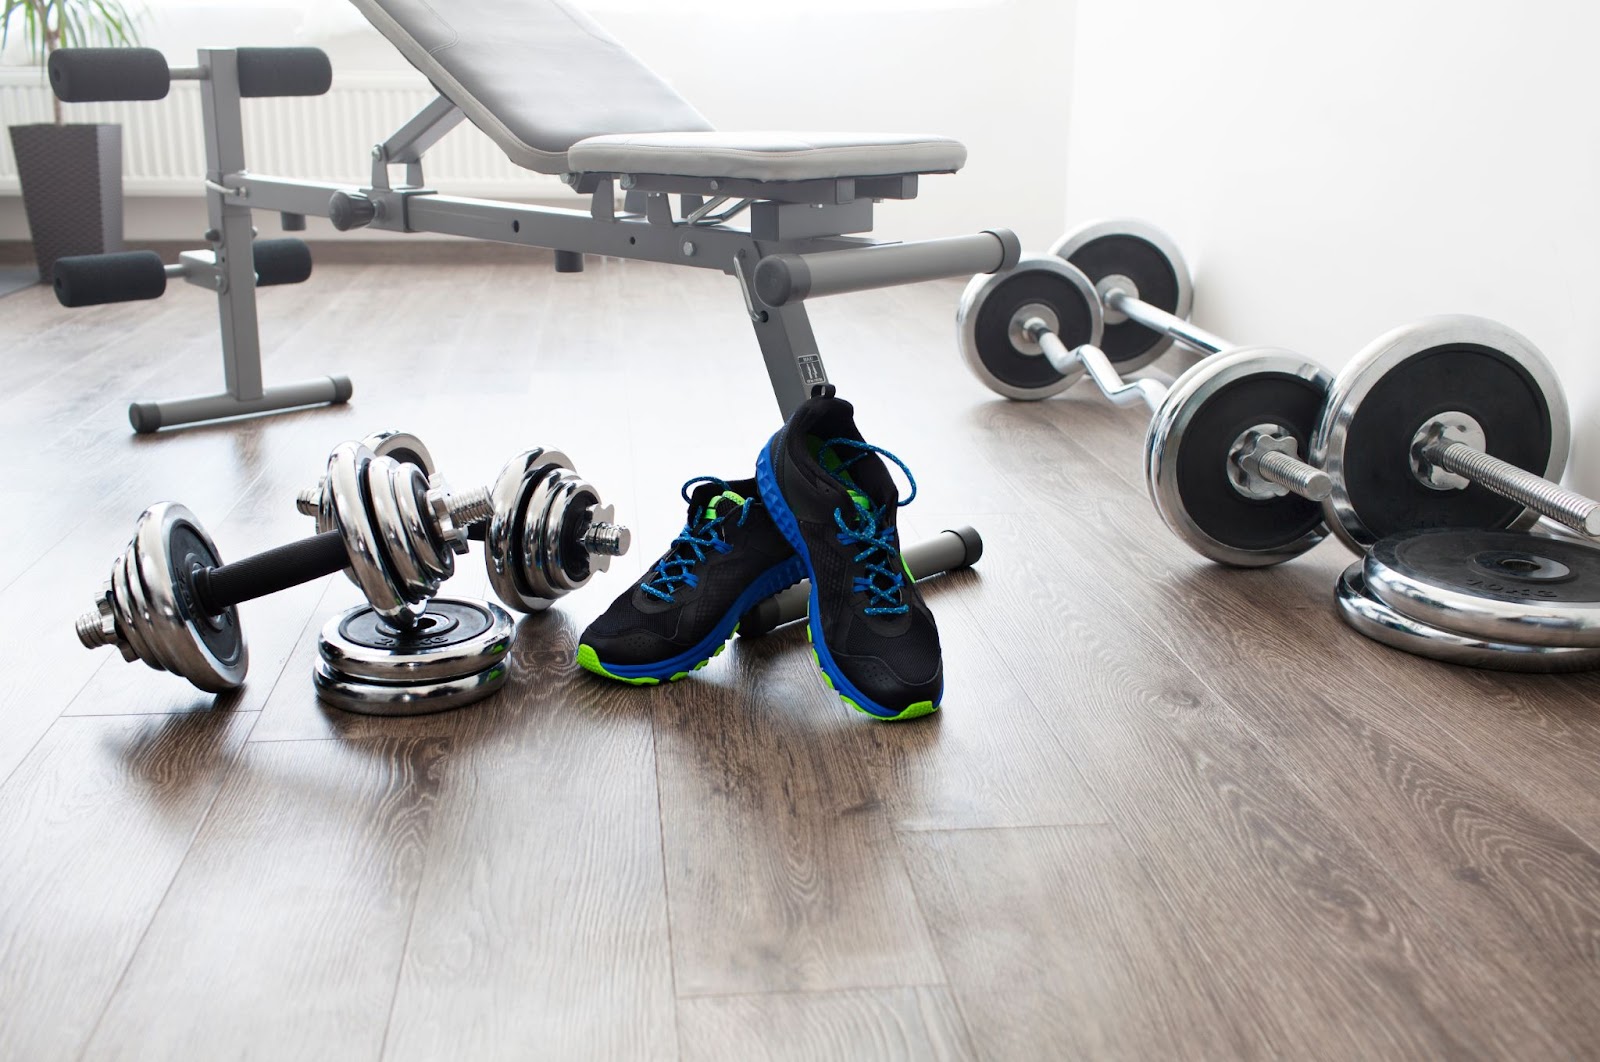 Image of home gym equipment, including shoes and dumbbells